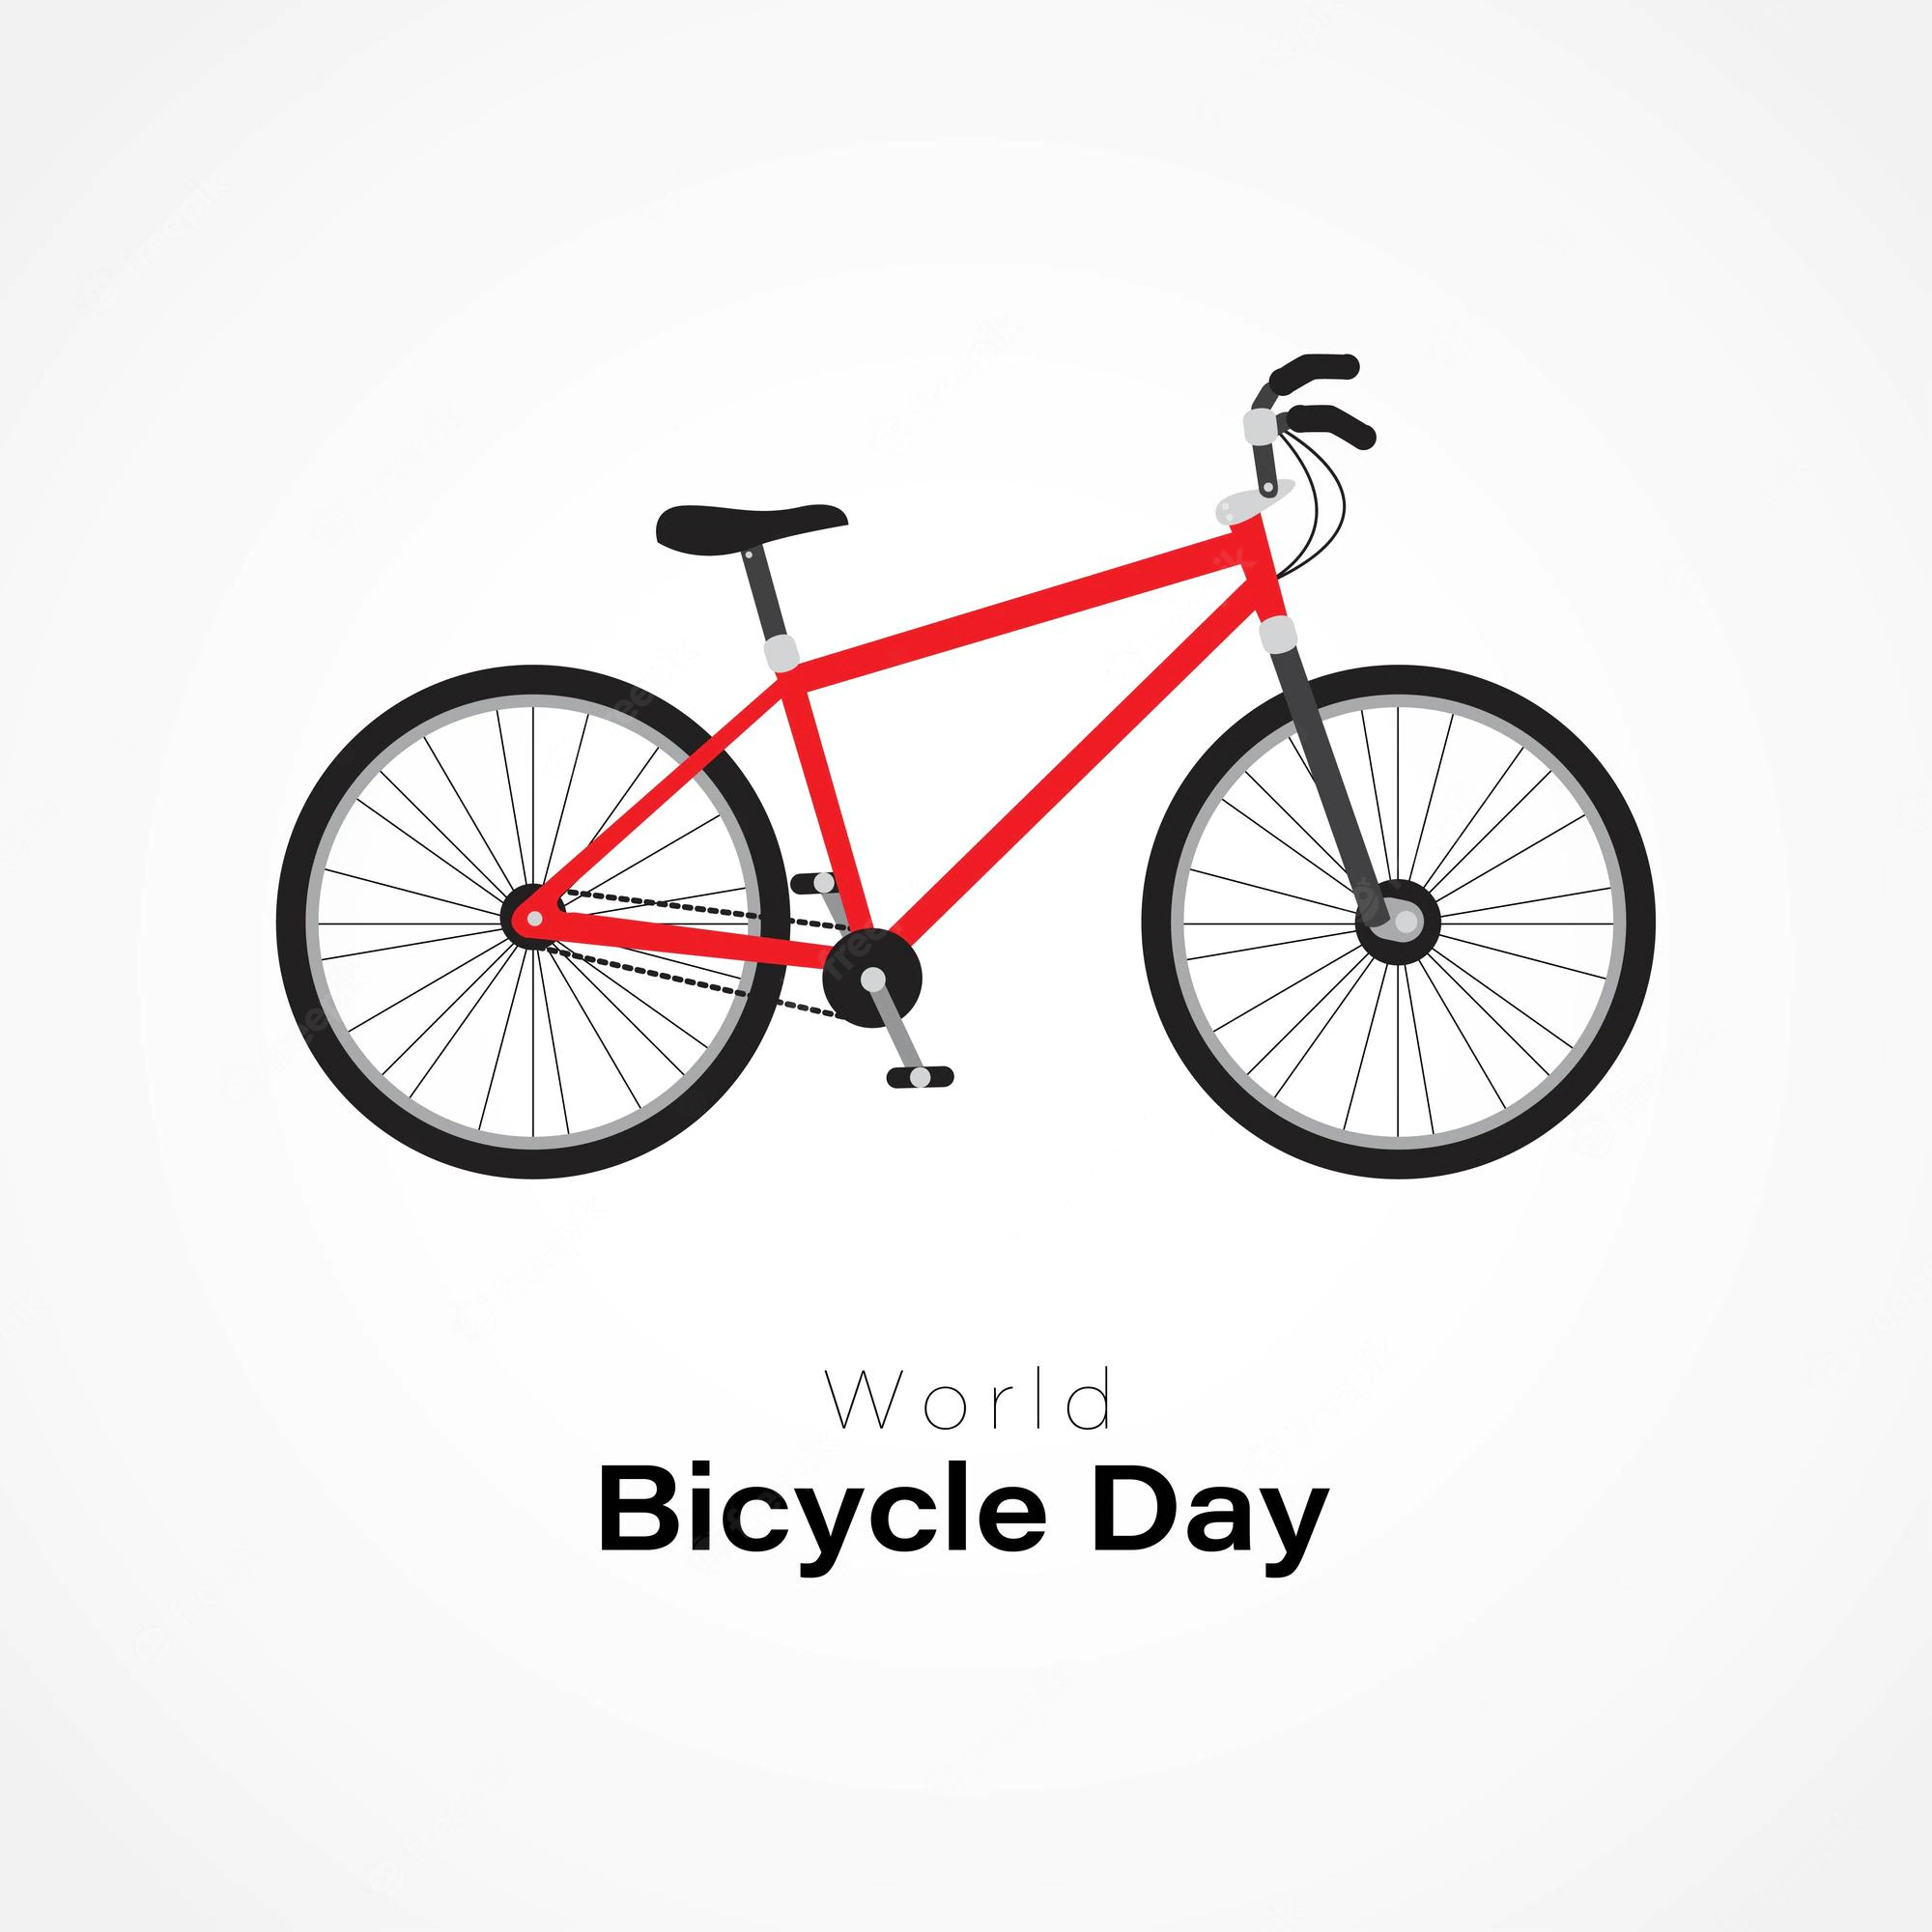 Kriva Palanka: How to fix your Bike – peer to peer workshop Marking World Bicycle Day